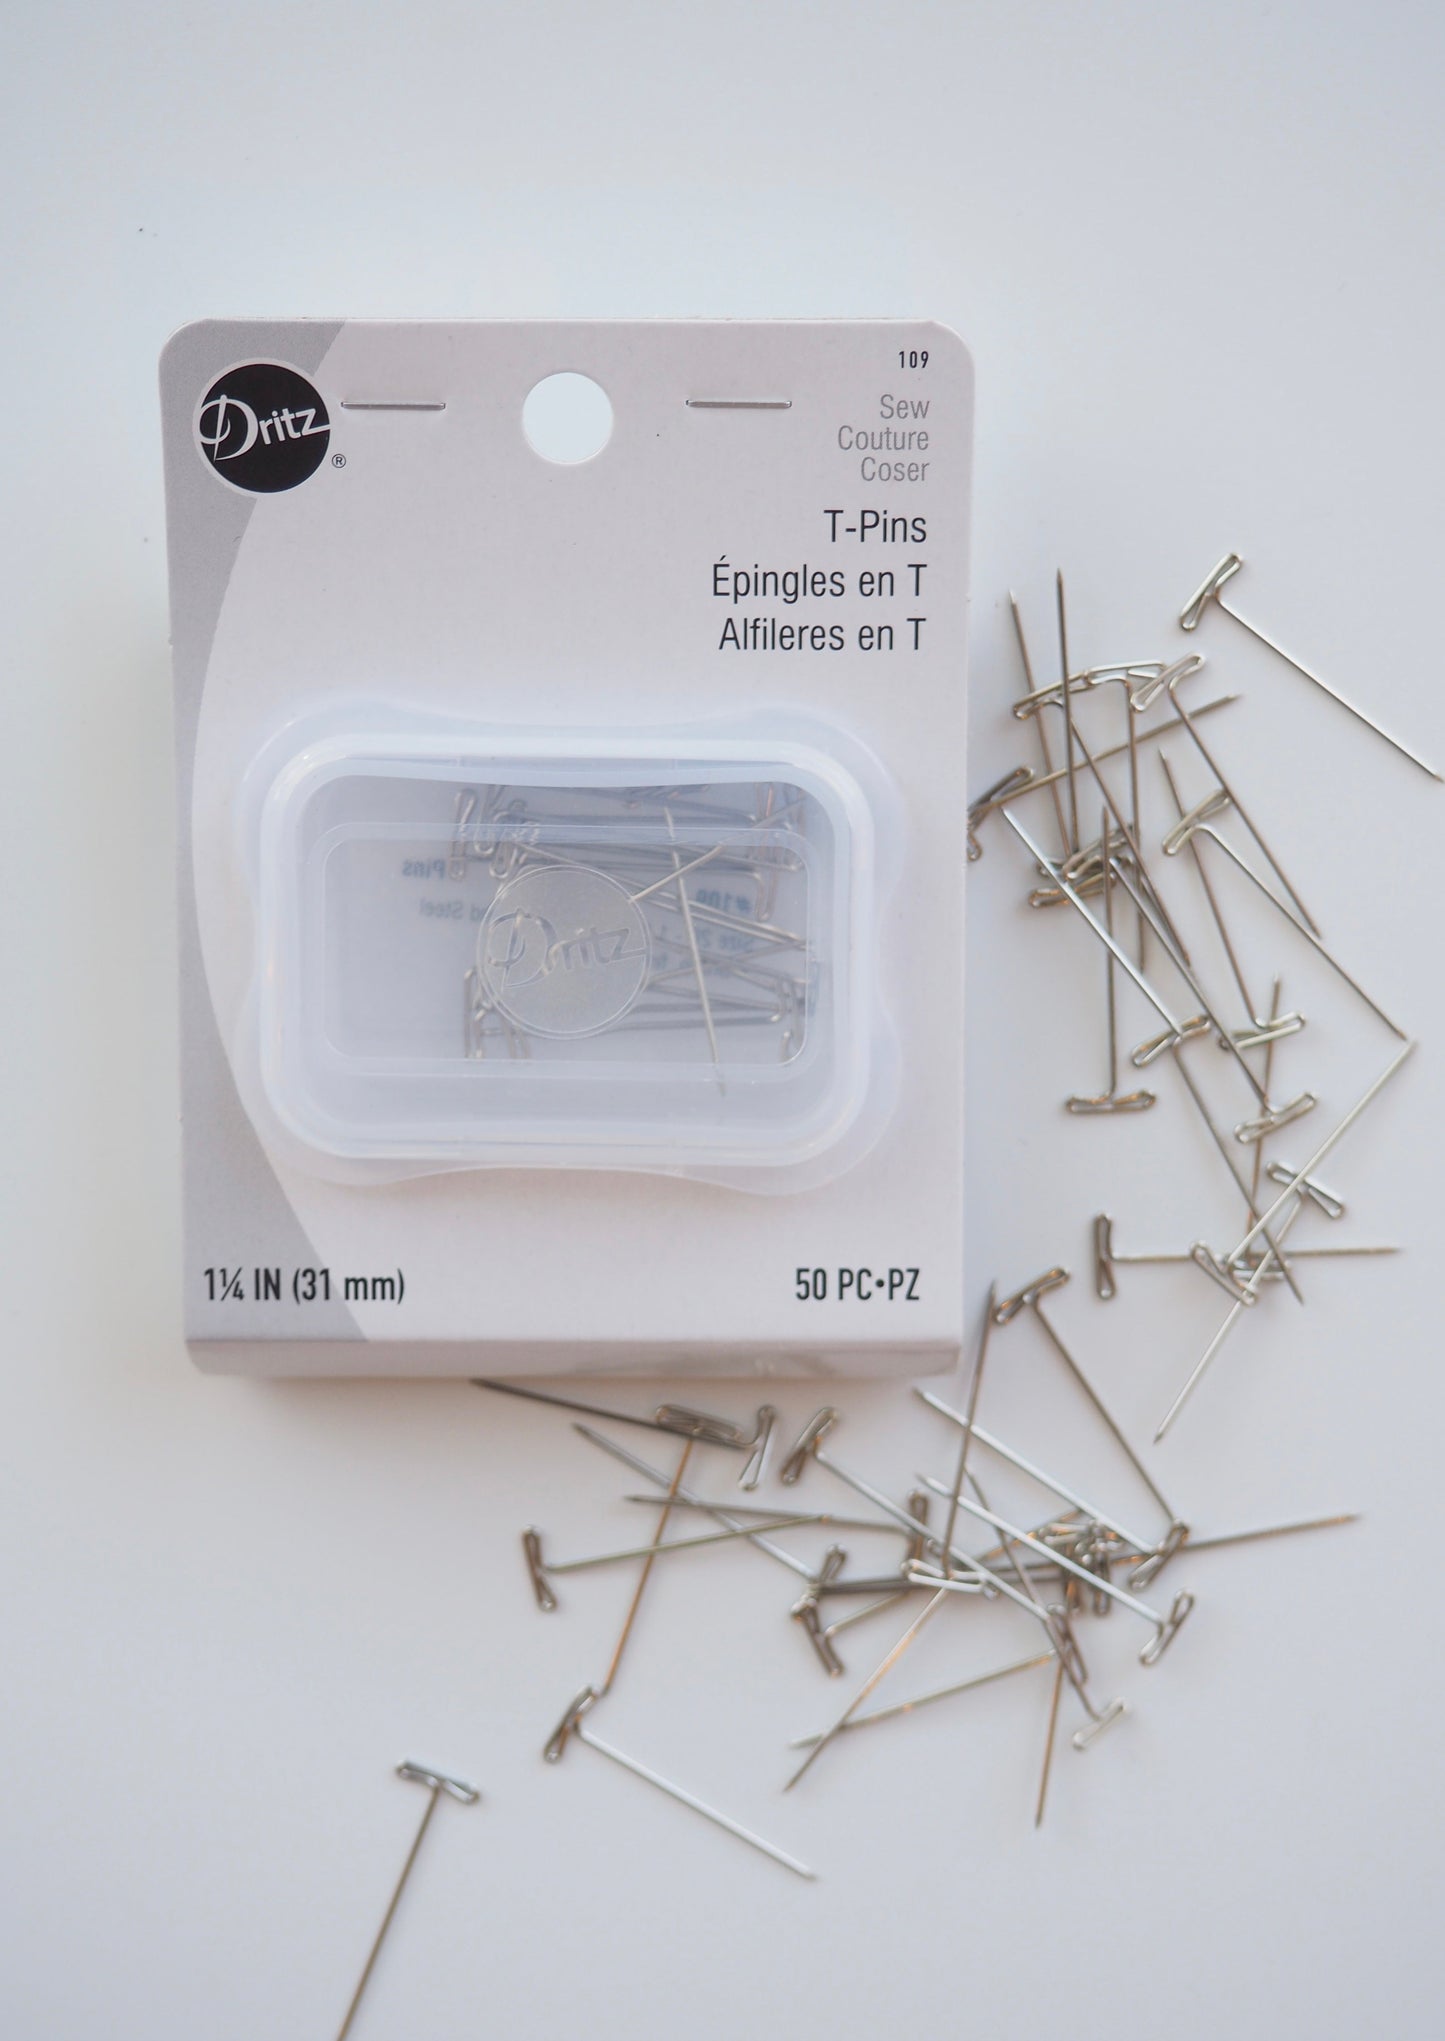 Dritz - T-Pins - Size 20 - 1 1/4" - 50 count